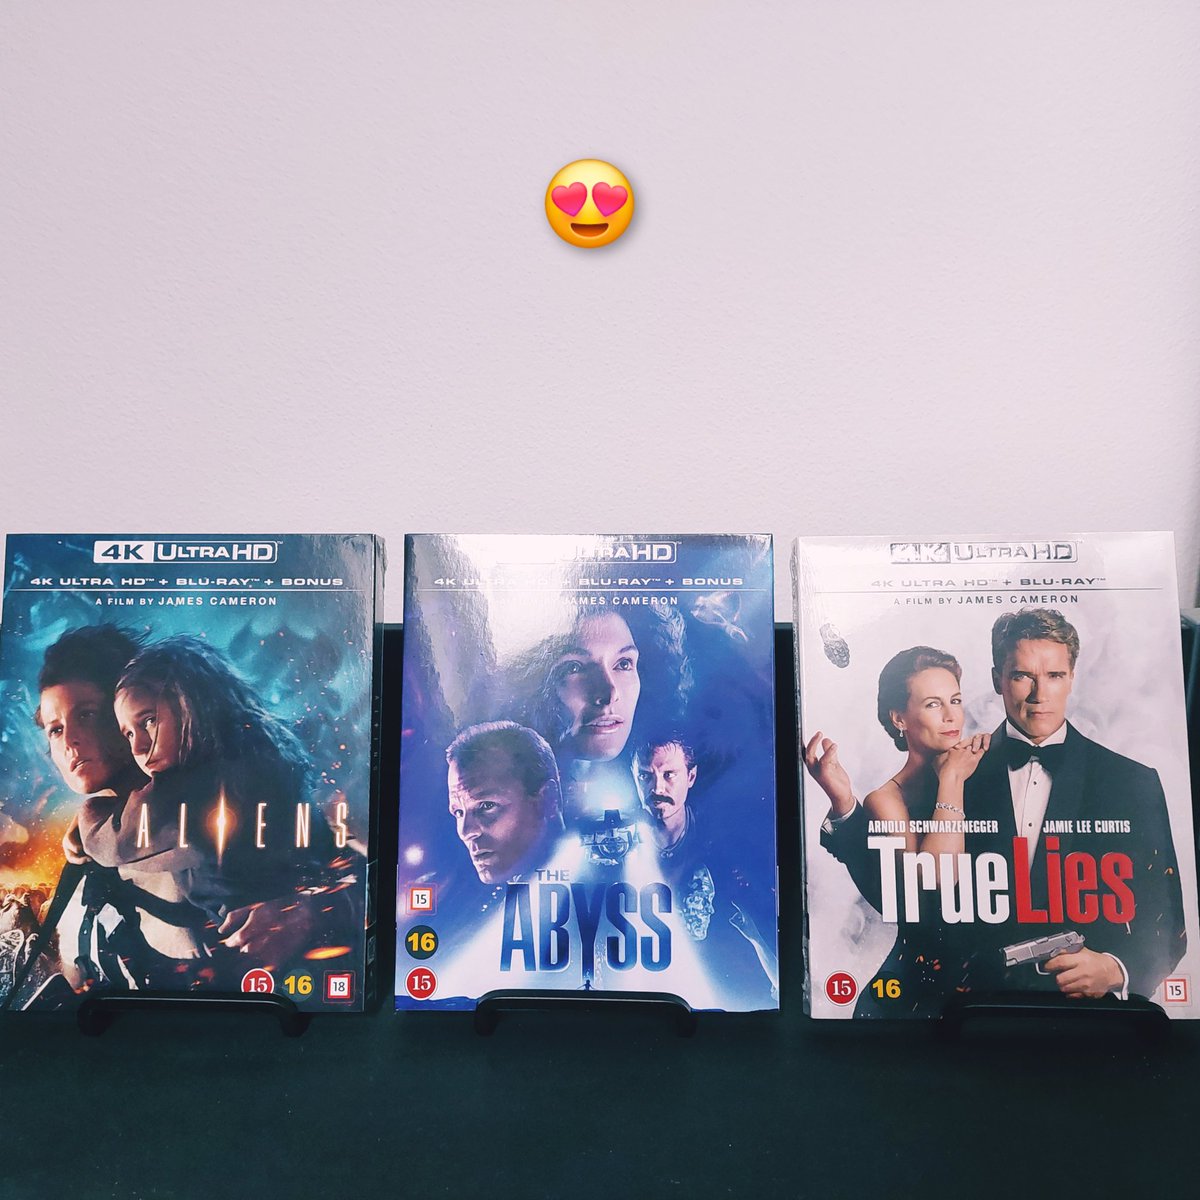 This is my weekend settled with these highly anticipated  James Cameron 4k releases of #Aliens, #TrueLies and #TheAbyss! #SupportPhysicalMedia 💿